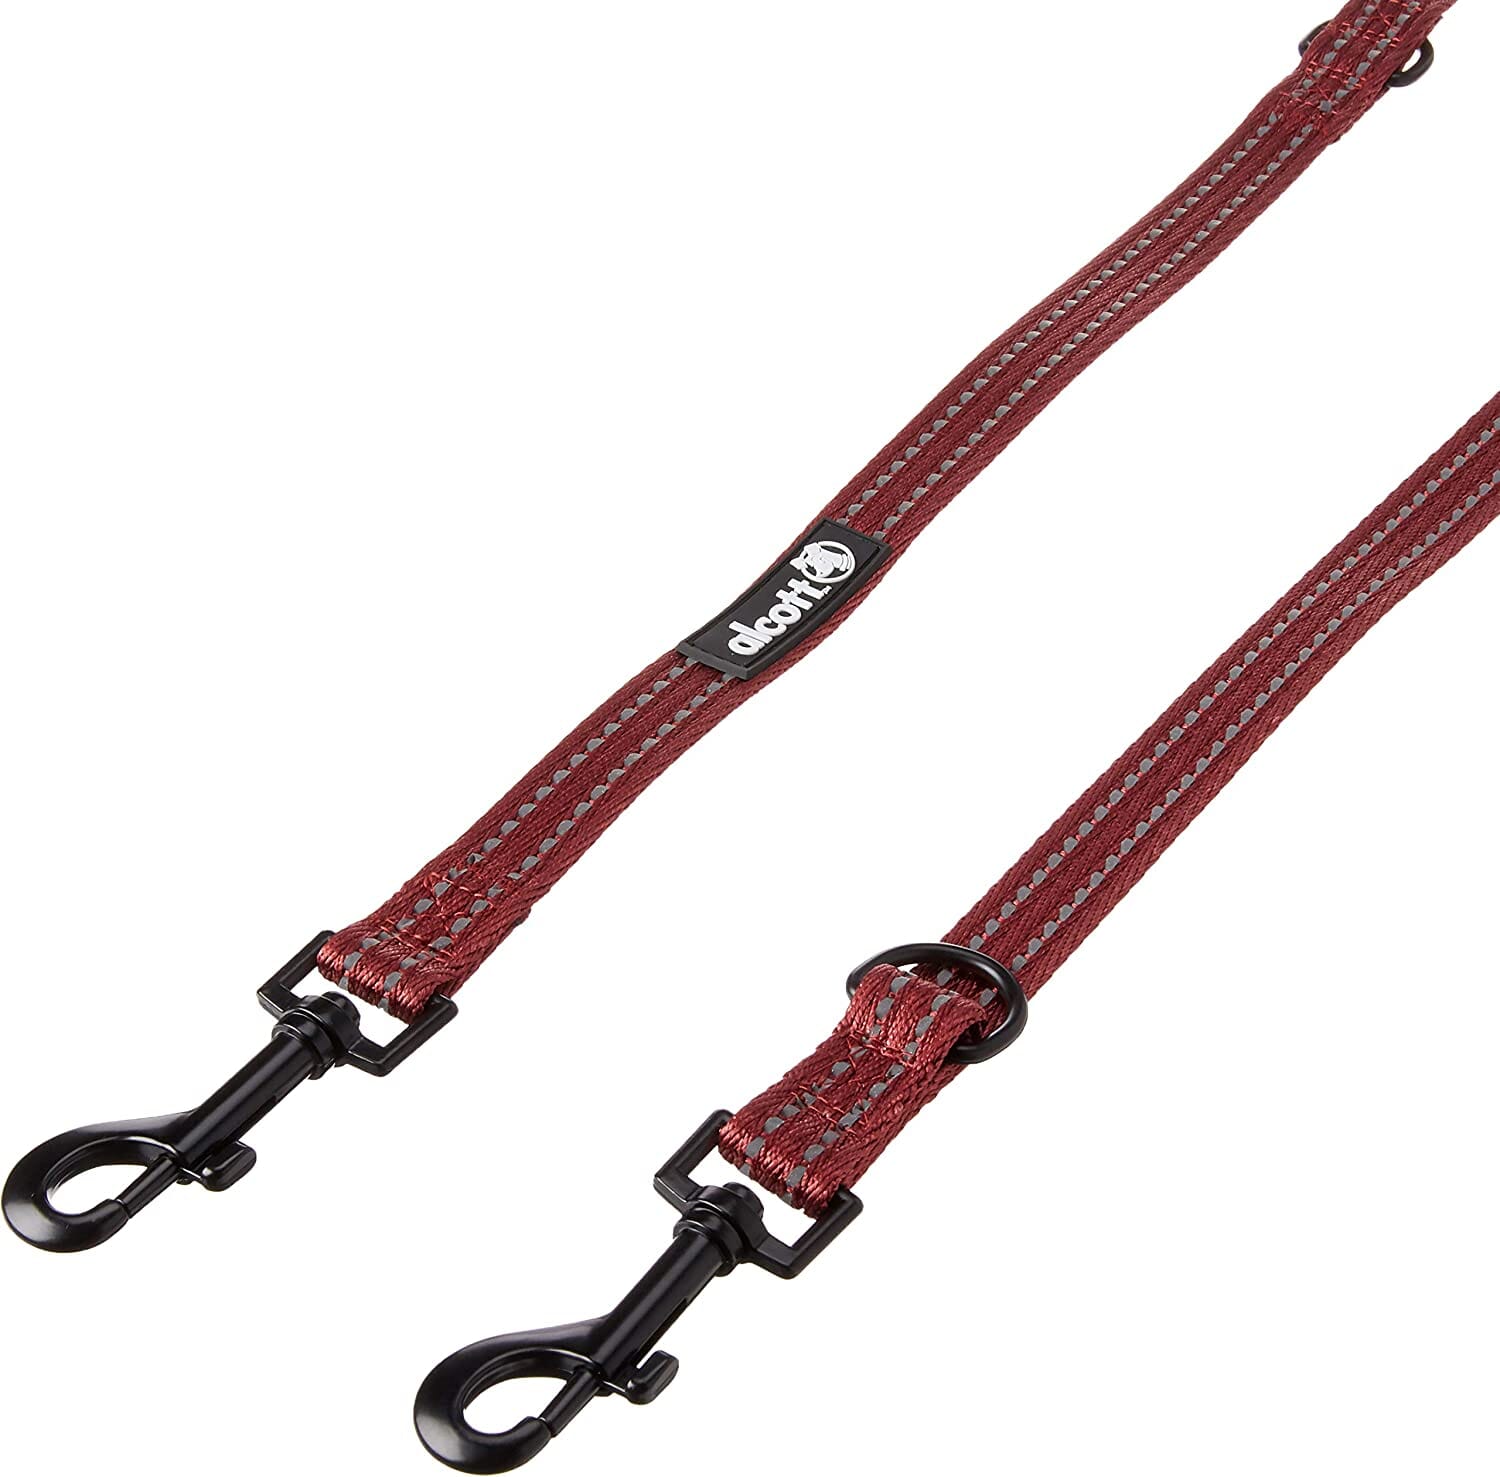 High quality, affordably priced adventure gear Alcott Adjustable Leash is convenient, safer,fun to spend time with your pet.